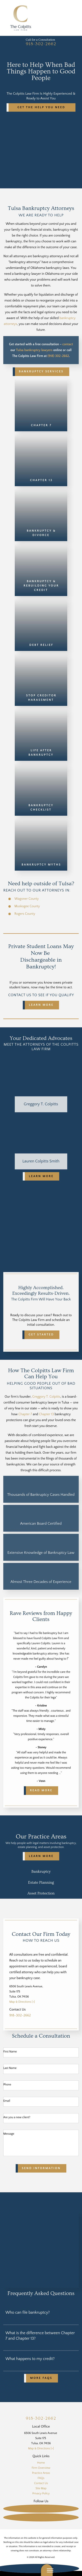 The Colpitts Law Firm - Tulsa OK Lawyers